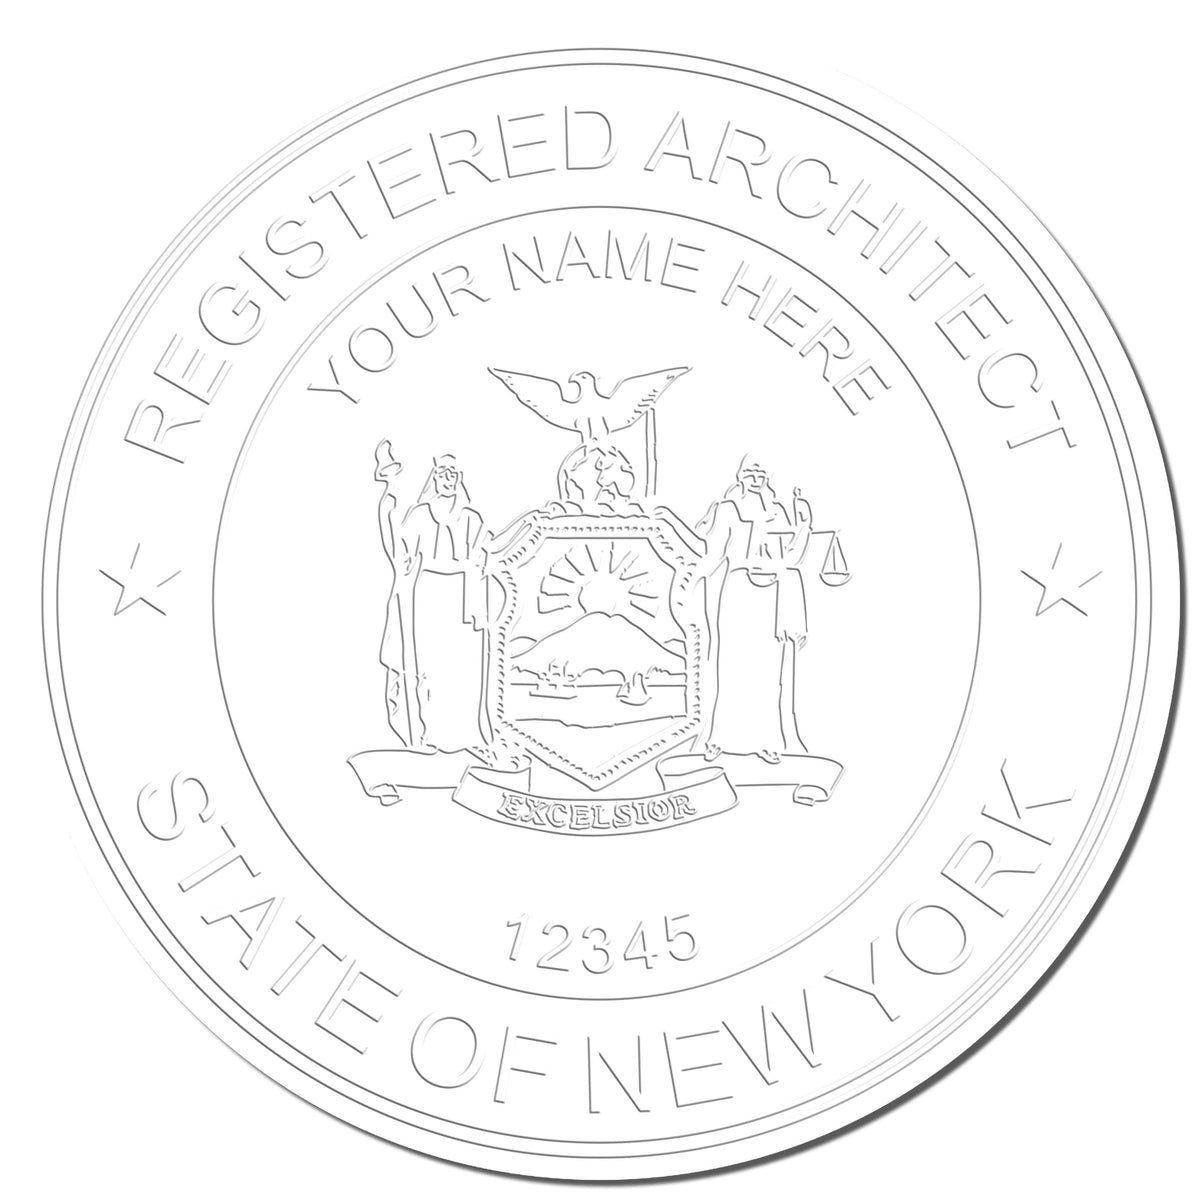 A photograph of the New York Desk Architect Embossing Seal stamp impression reveals a vivid, professional image of the on paper.